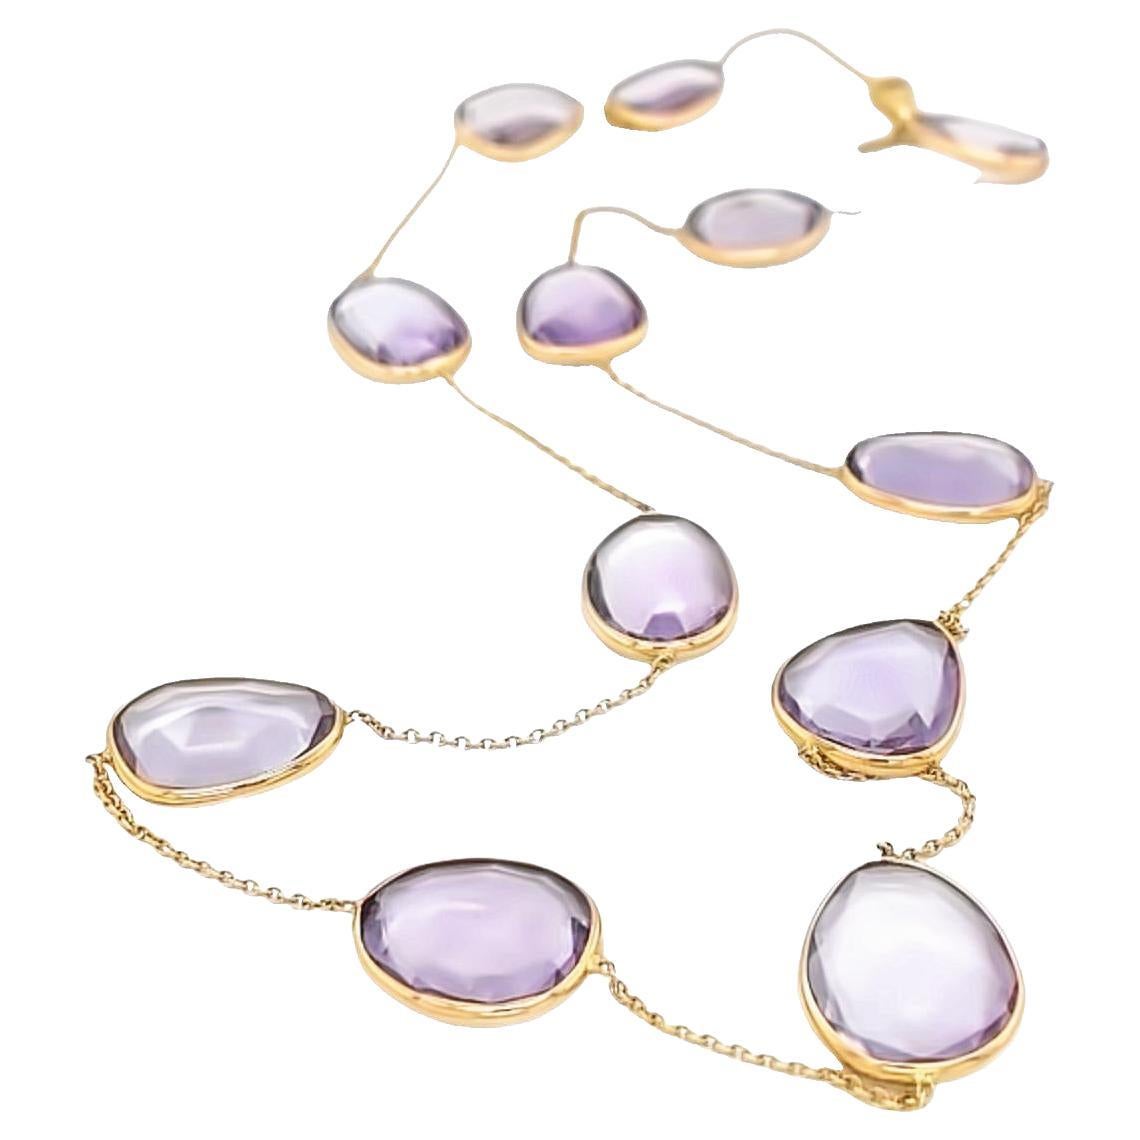 Nari Fine Jewels Handcrafted Amethyst Multi Shape Station Necklace in 18k Yellow